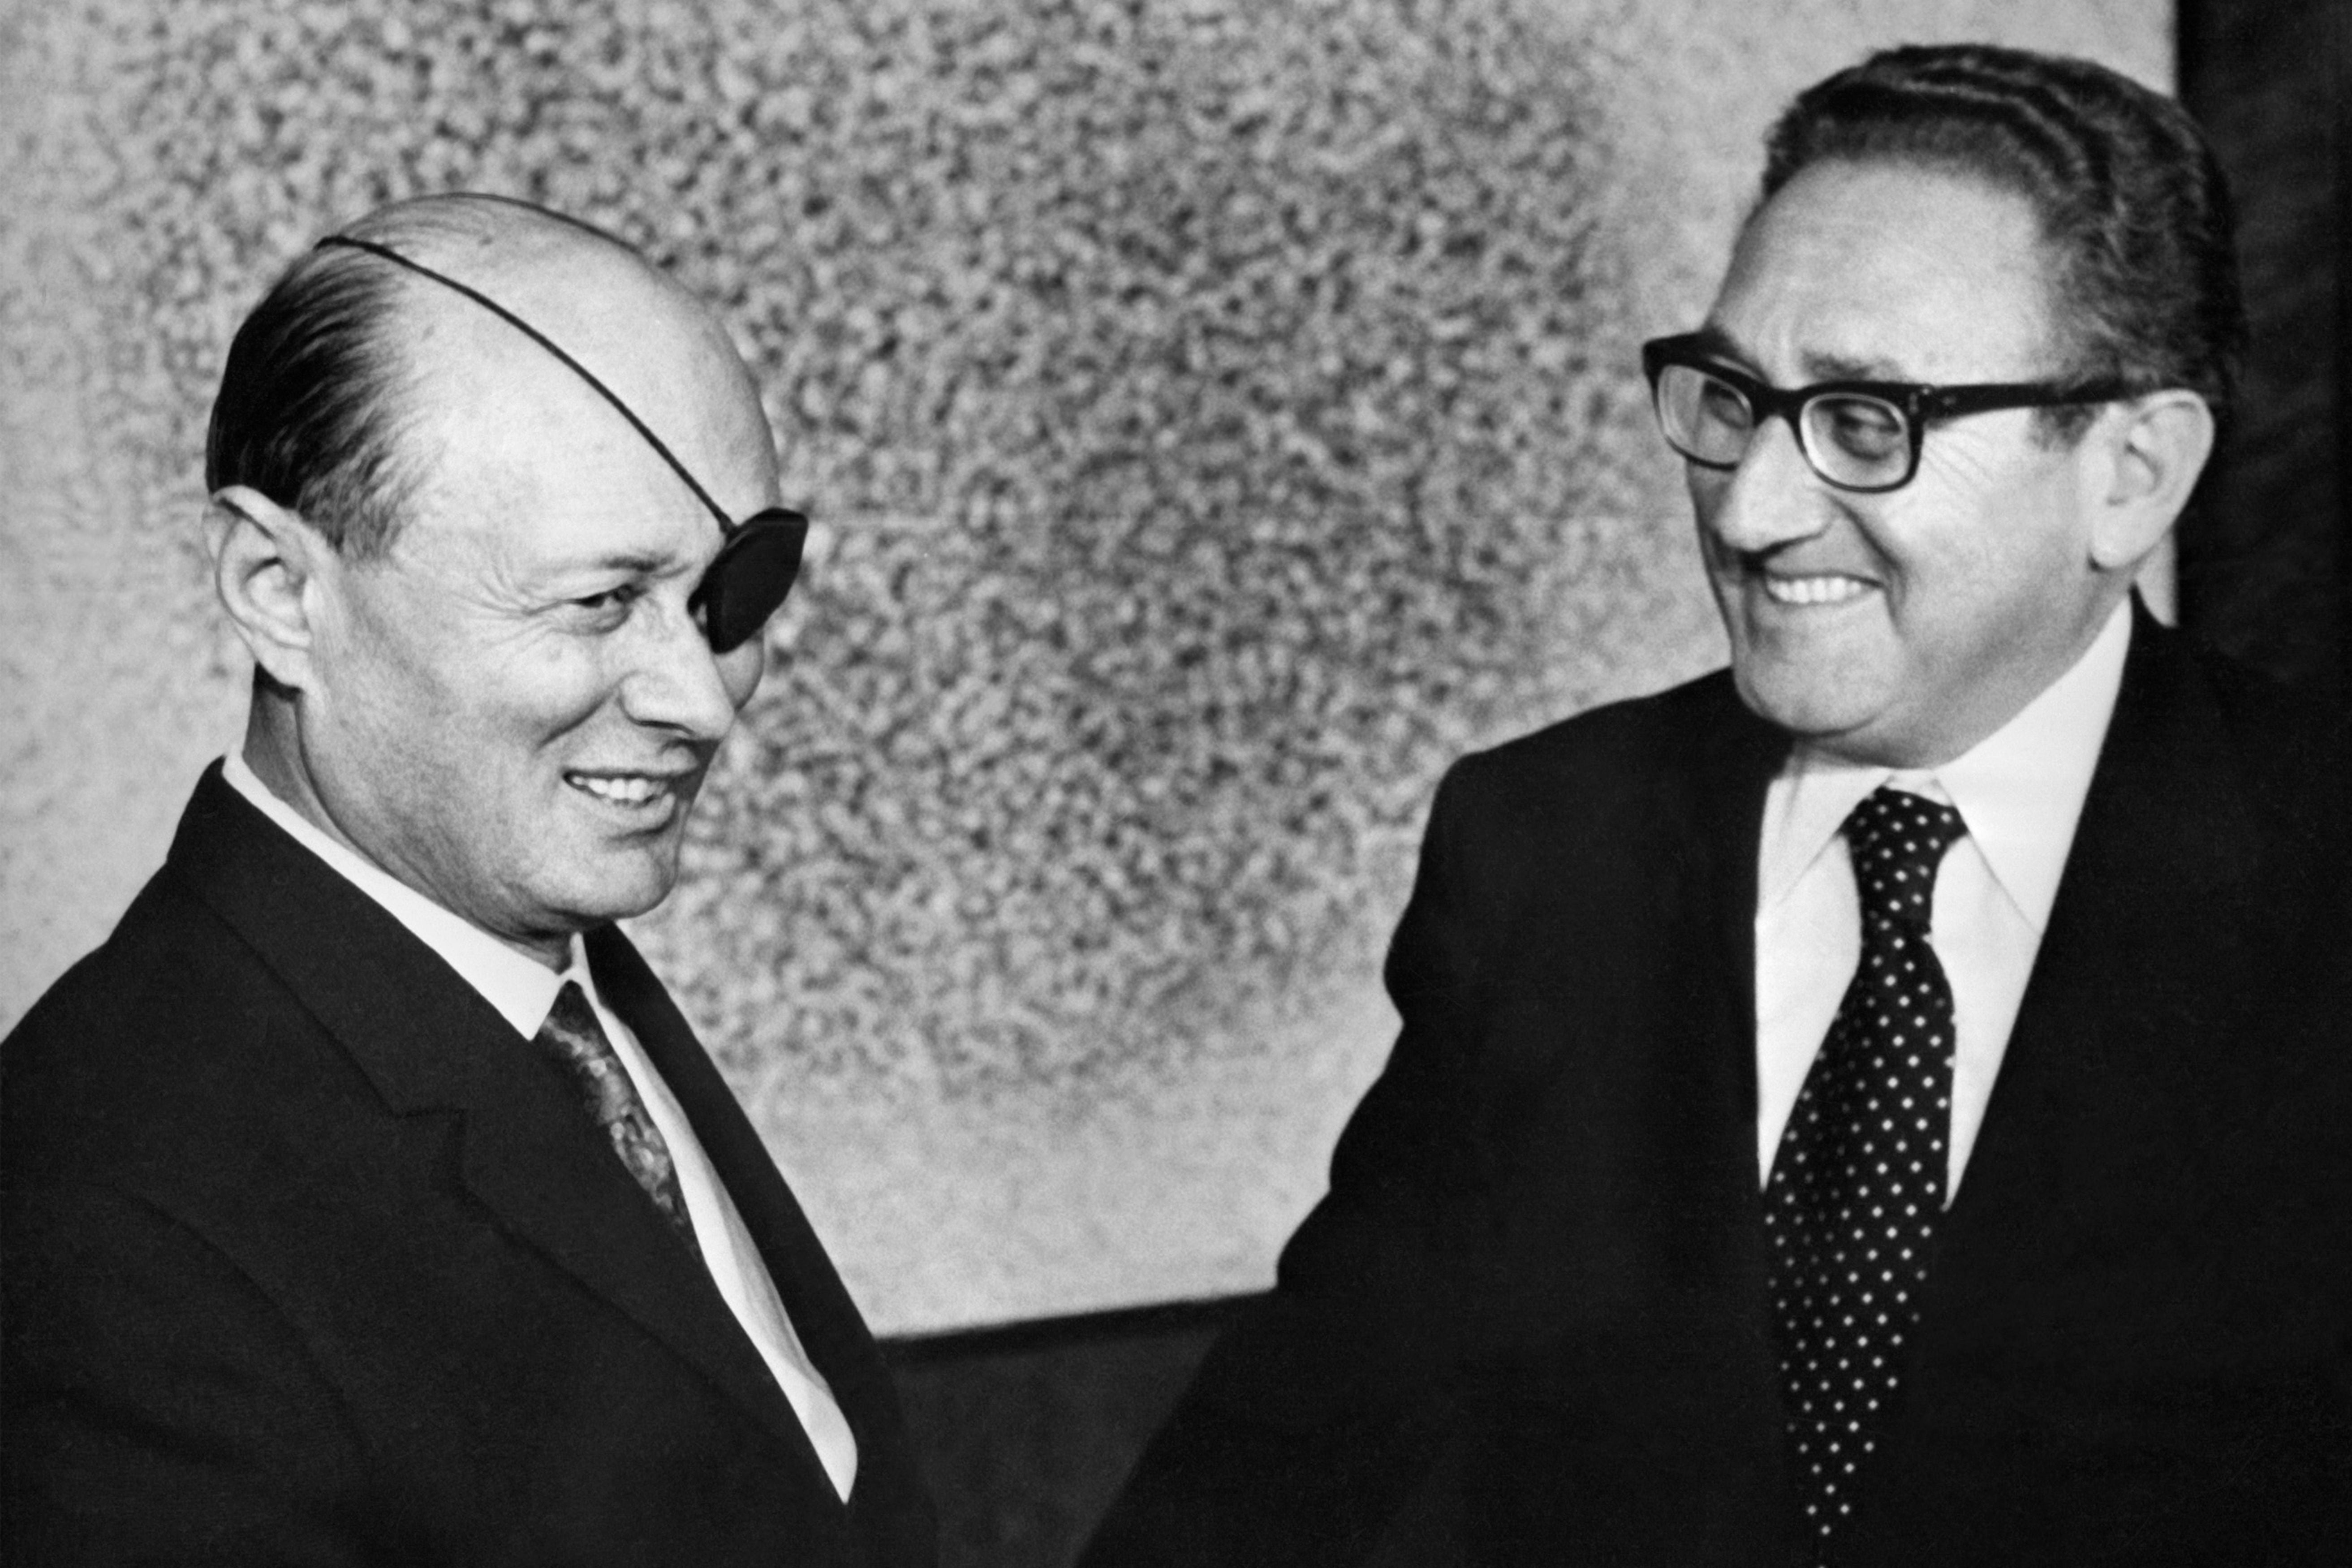 Kissinger meets with Israel’s defence minister Moshe Dayan in Tel Aviv on 8 January 1974